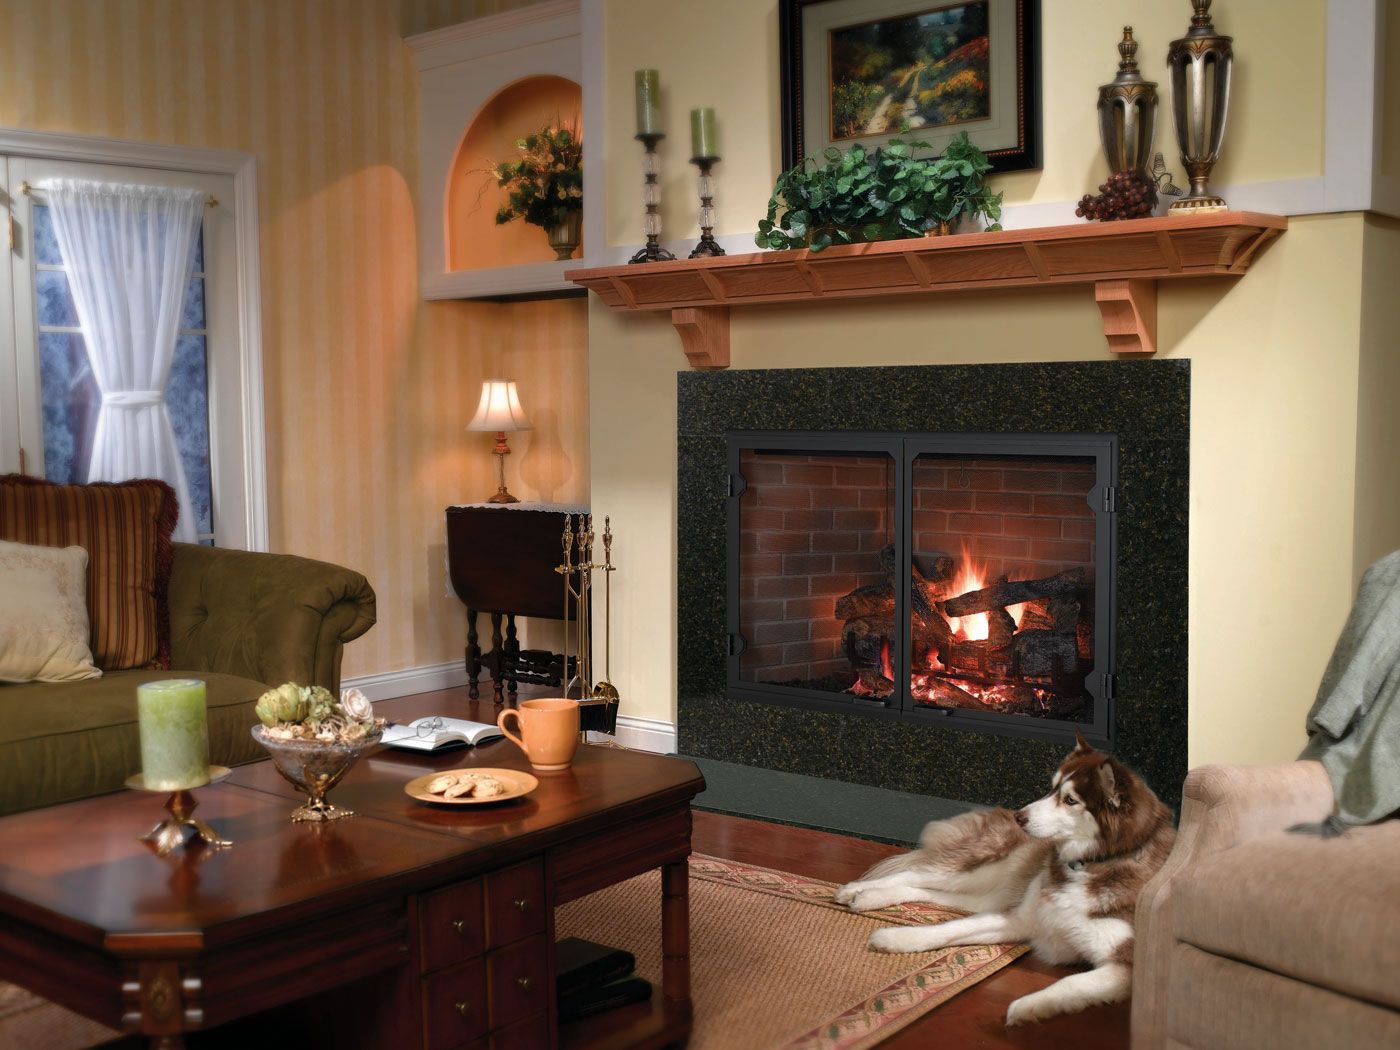 American Heritage Fireplace Unique 51 Best Wood Burning Stove Fireplaces Images